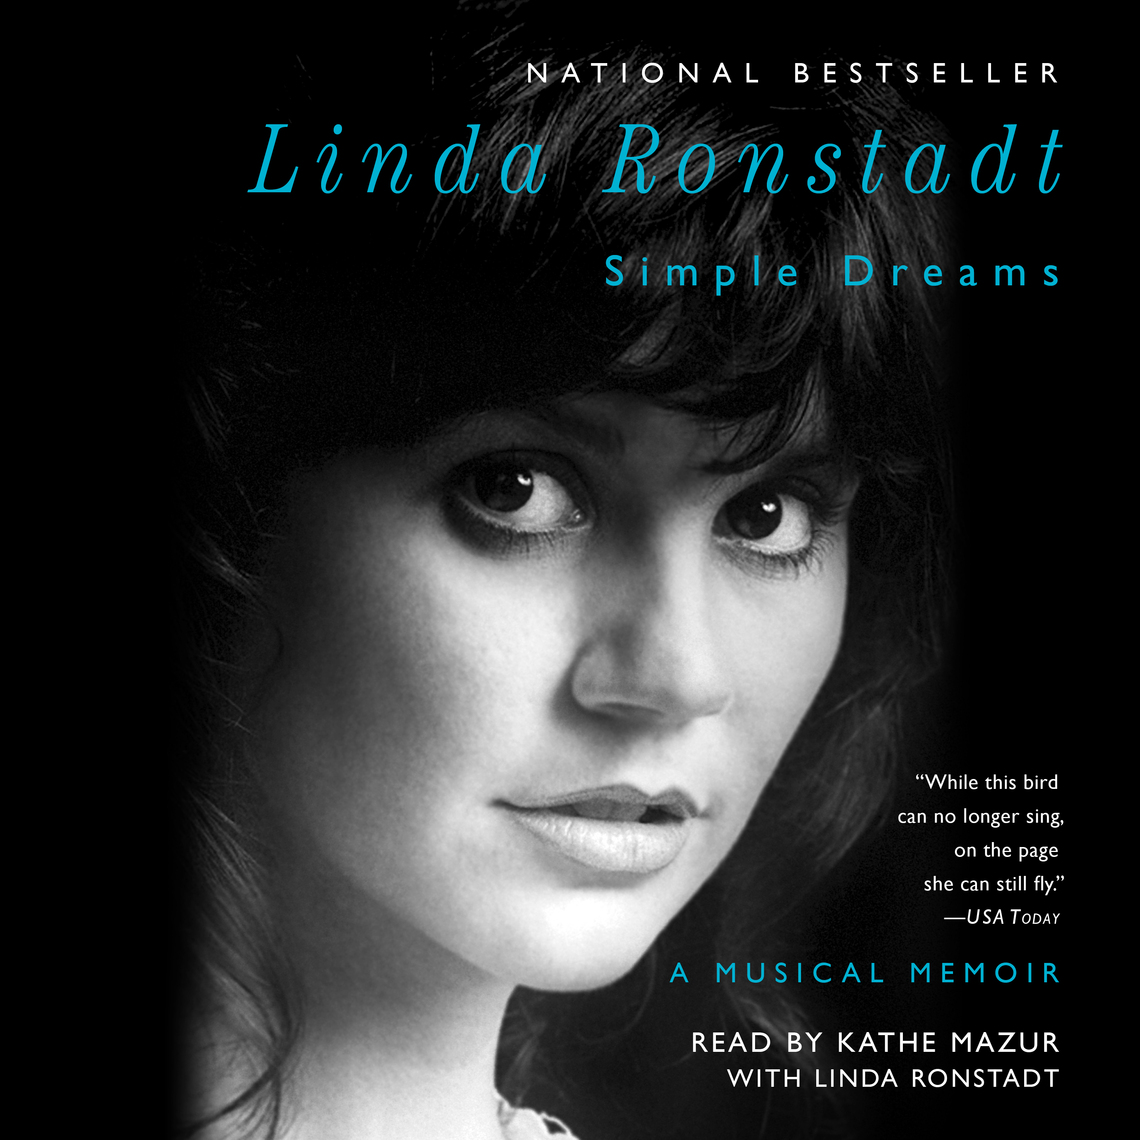 Where Linda Lives/Has Lived  Linda Ronstadt Fans Discussion